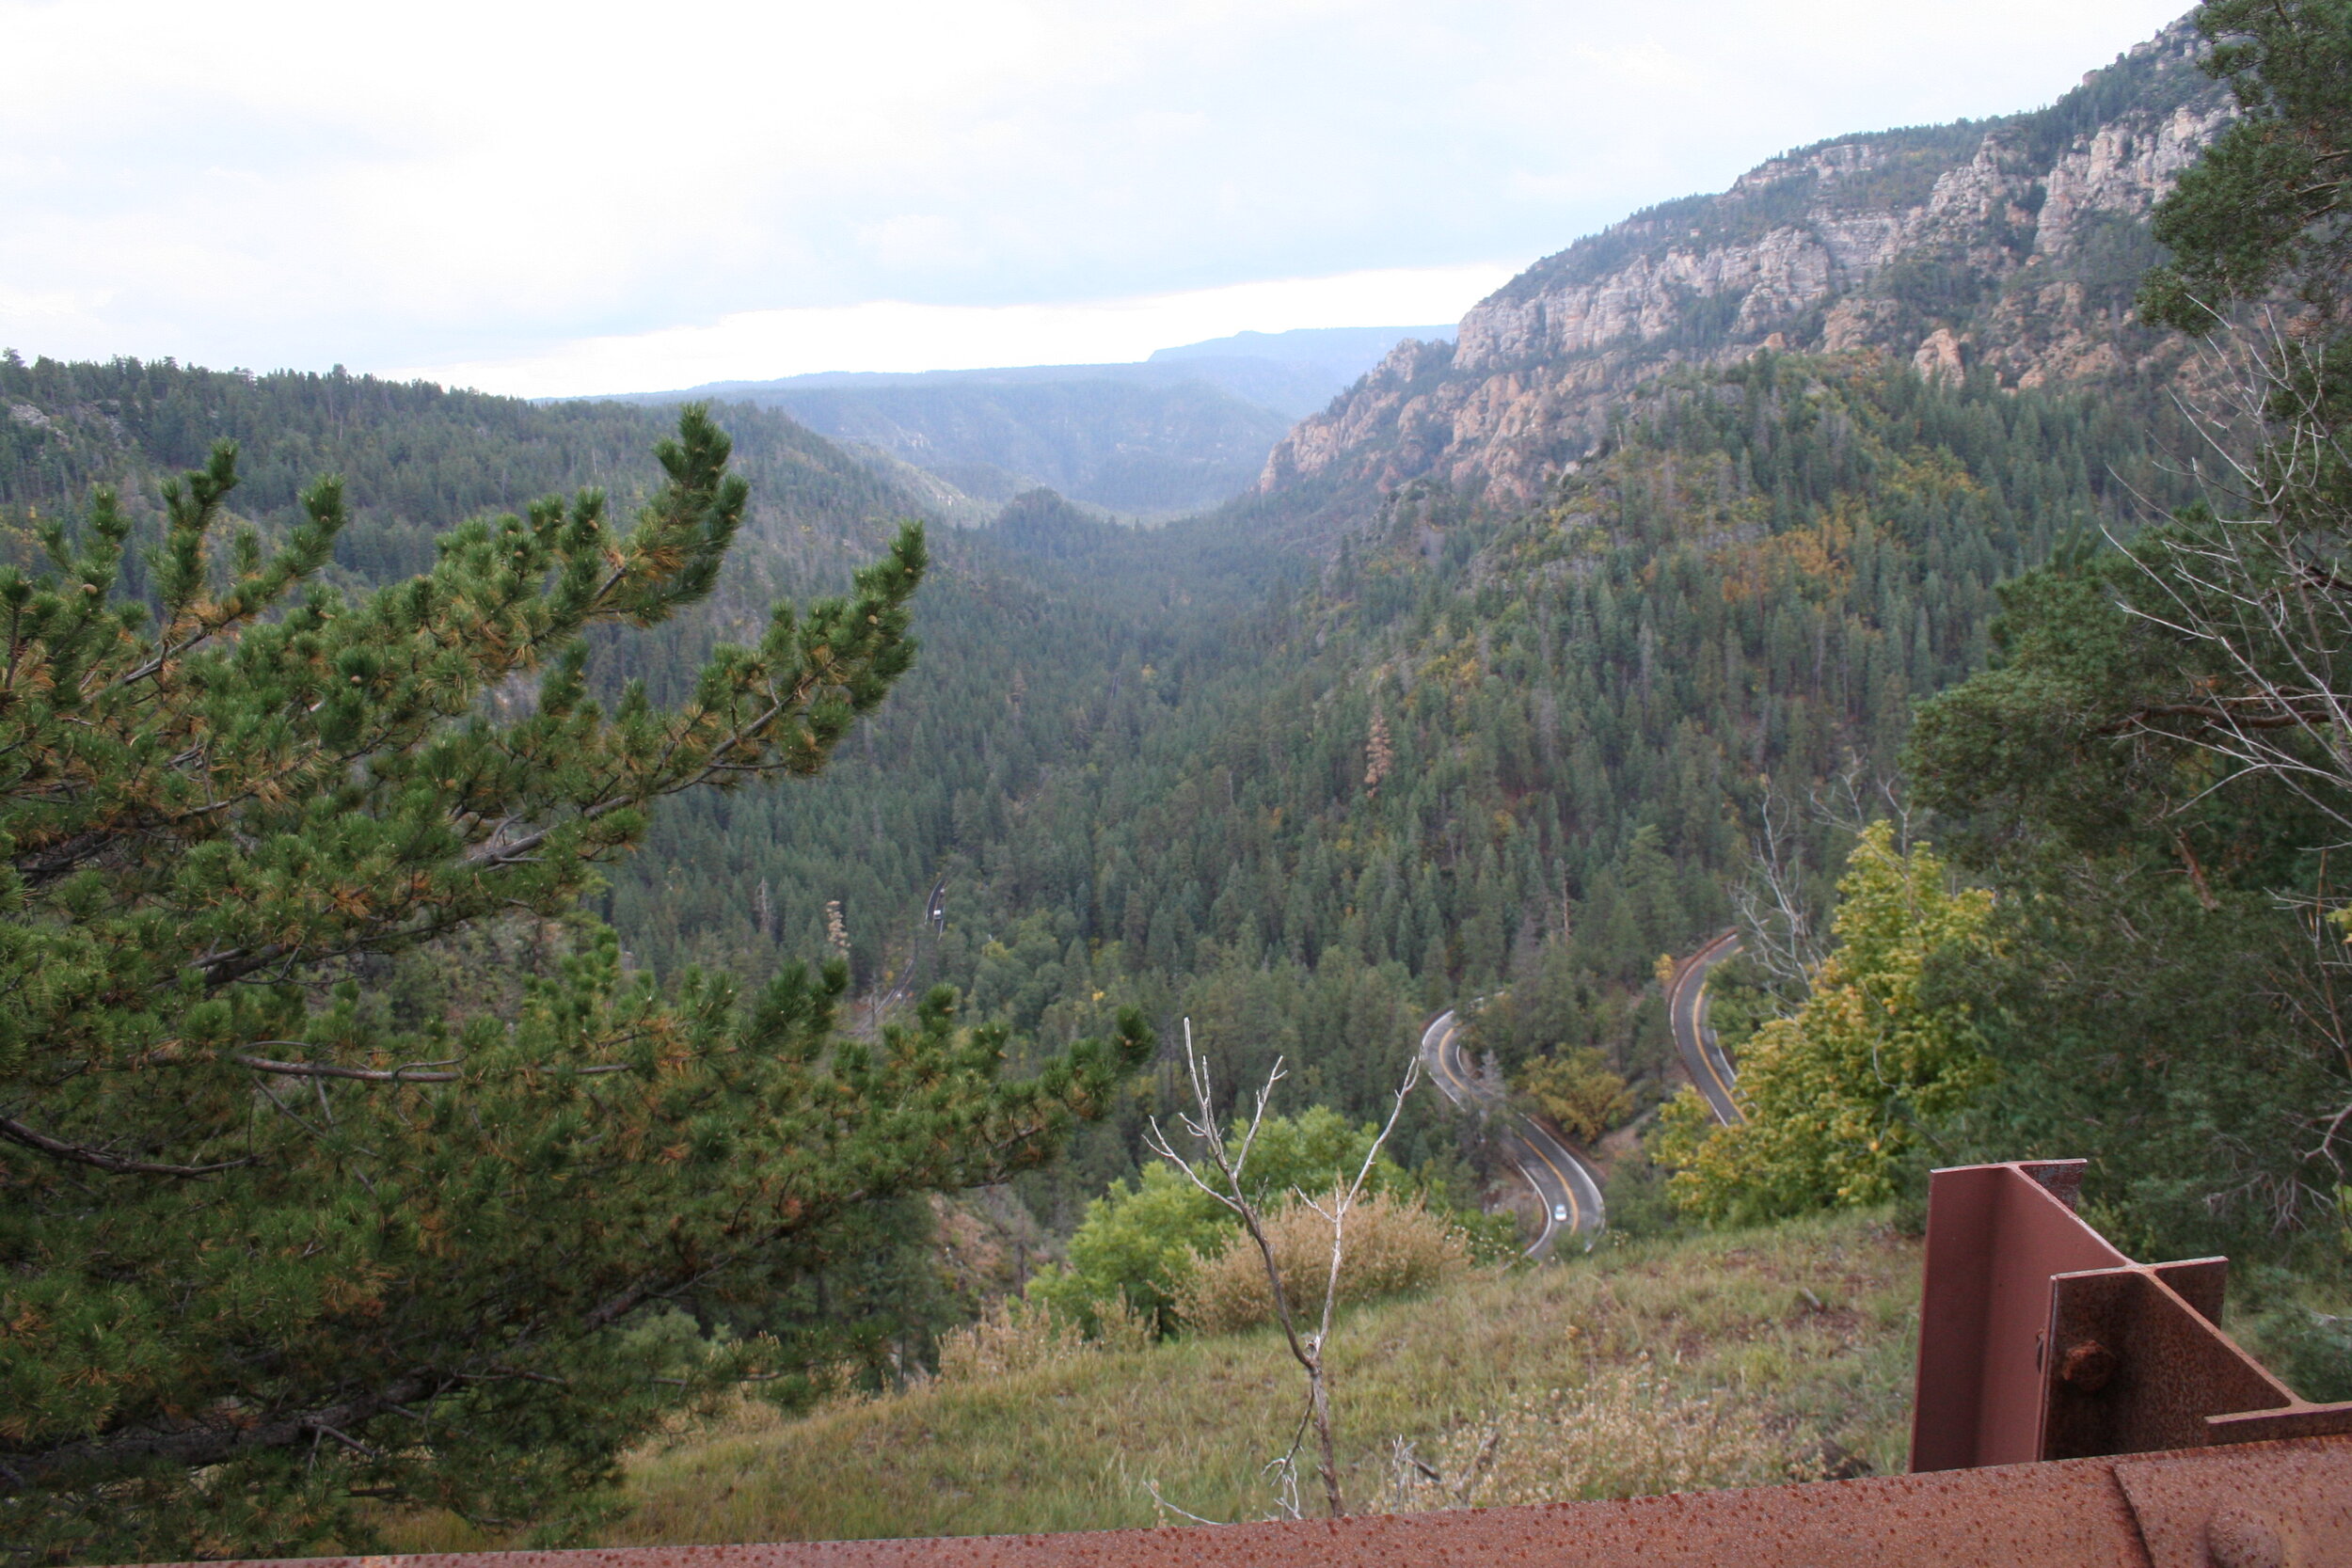   Oak Creek Canyon as seen from Highway 89A.  